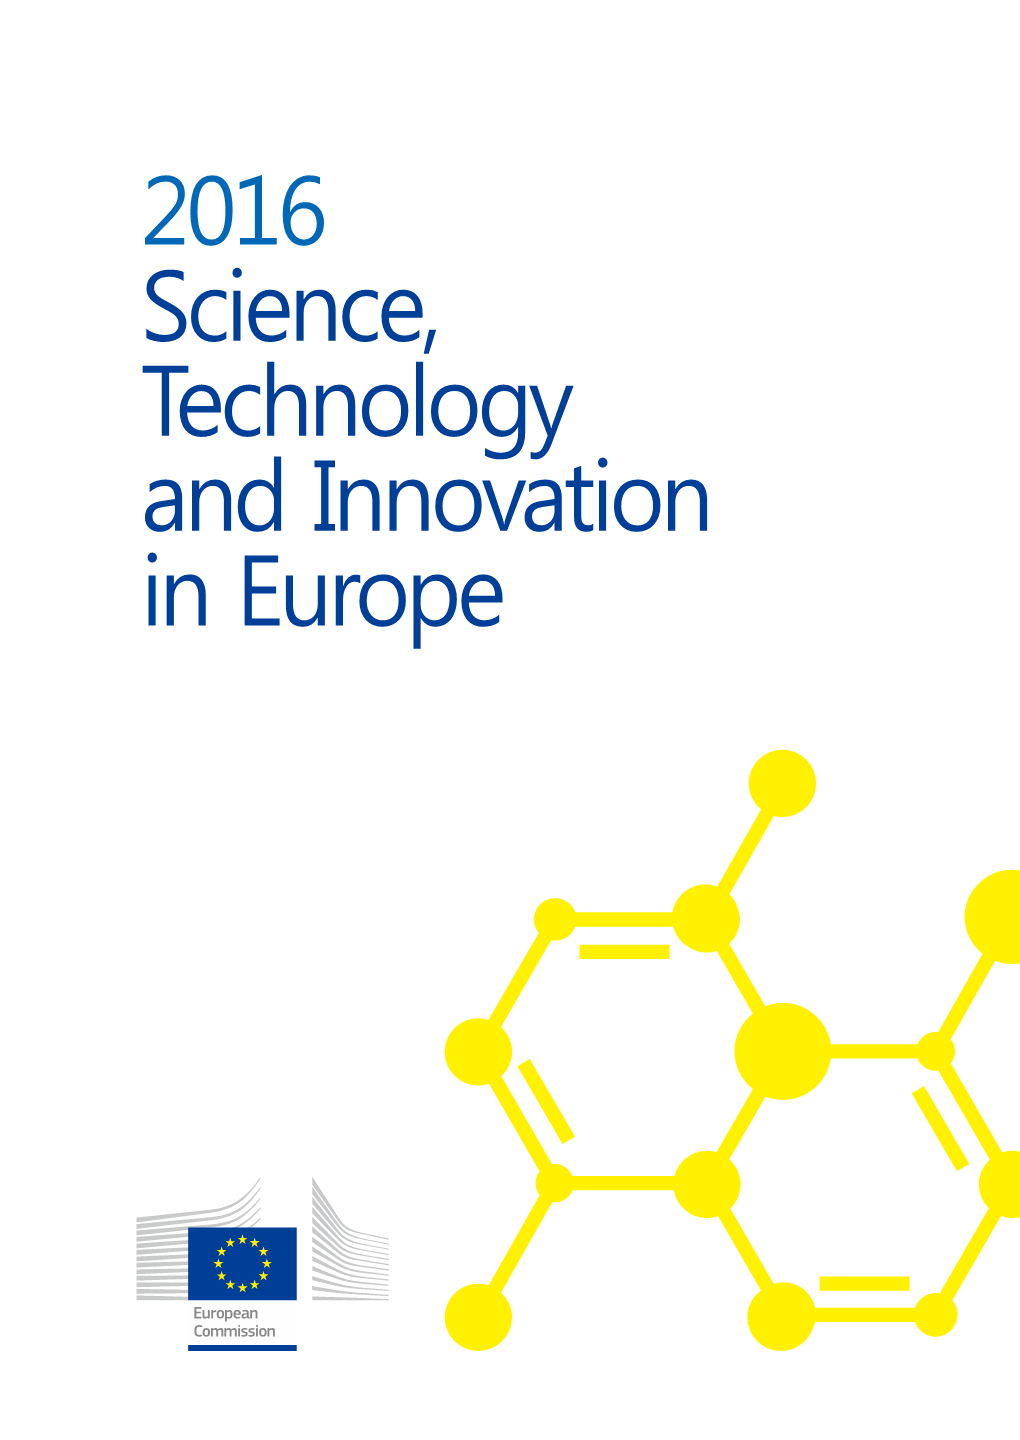 Science, Technology and Innovation in Europe